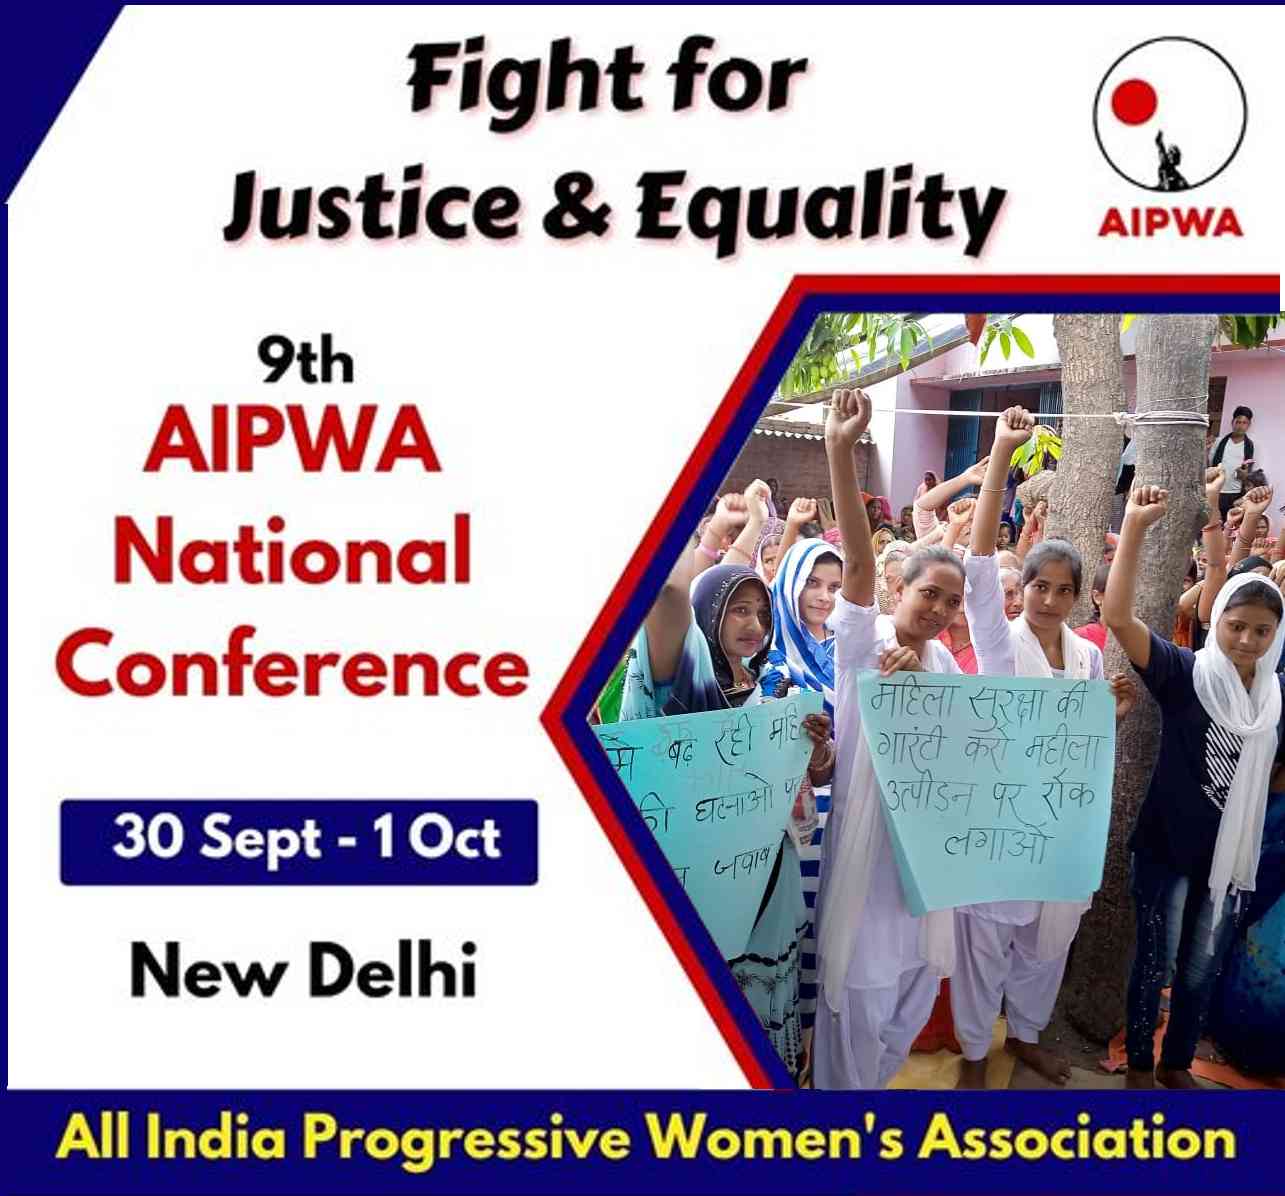 All India Progressive Women's Association (AIPWA) 9th National Conference on 30 September